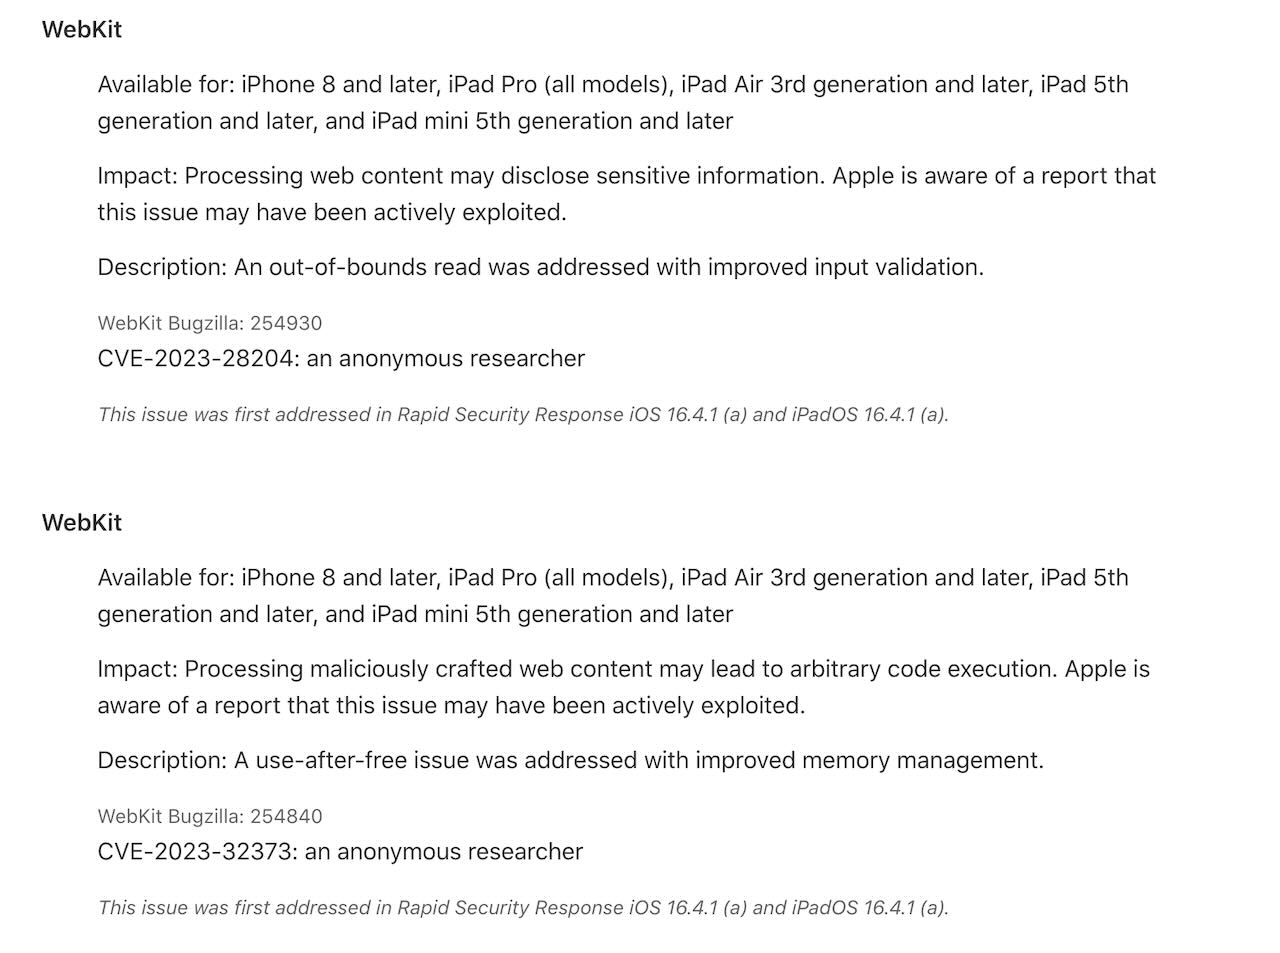 Apple's Rapid Security Response iOS and iPadOS 16.4.1 (a) release notes explaining changes related to CVE-2023-28204